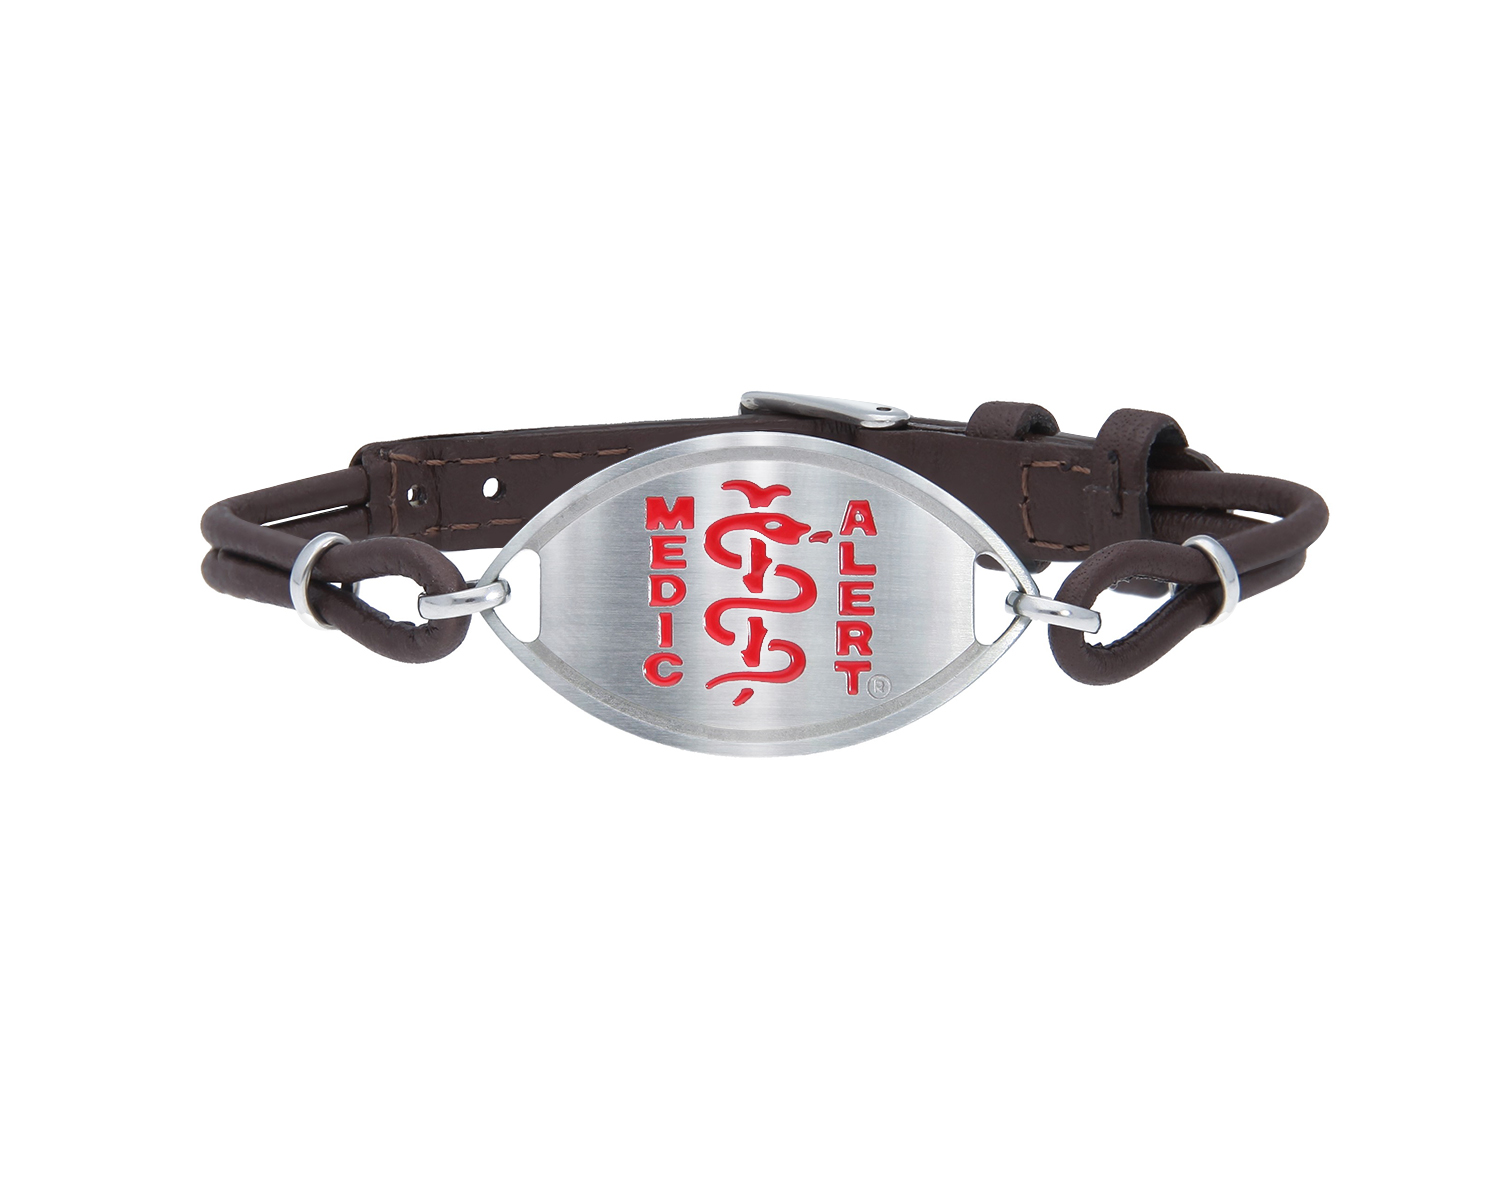 Brown leather strap for wrist with metal elliptical disc with a red MedicAlert logo which includes the universal medical sign of a snake wrapped around a rod